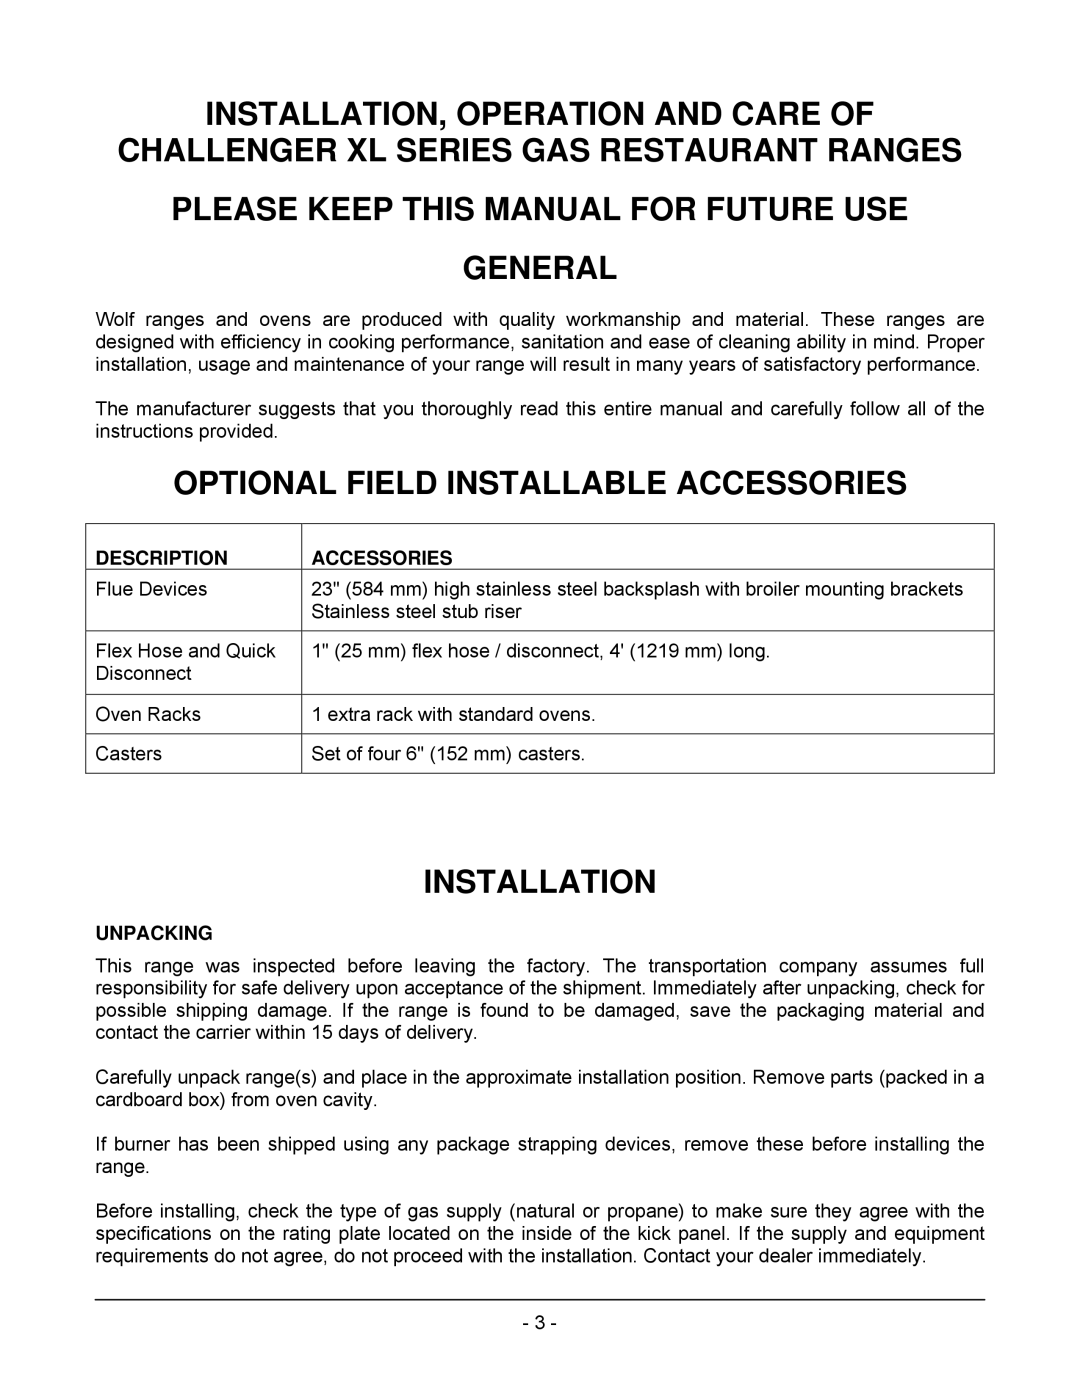 Wolf C72SS operation manual Optional Field Installable Accessories, Installation, Description, Unpacking 